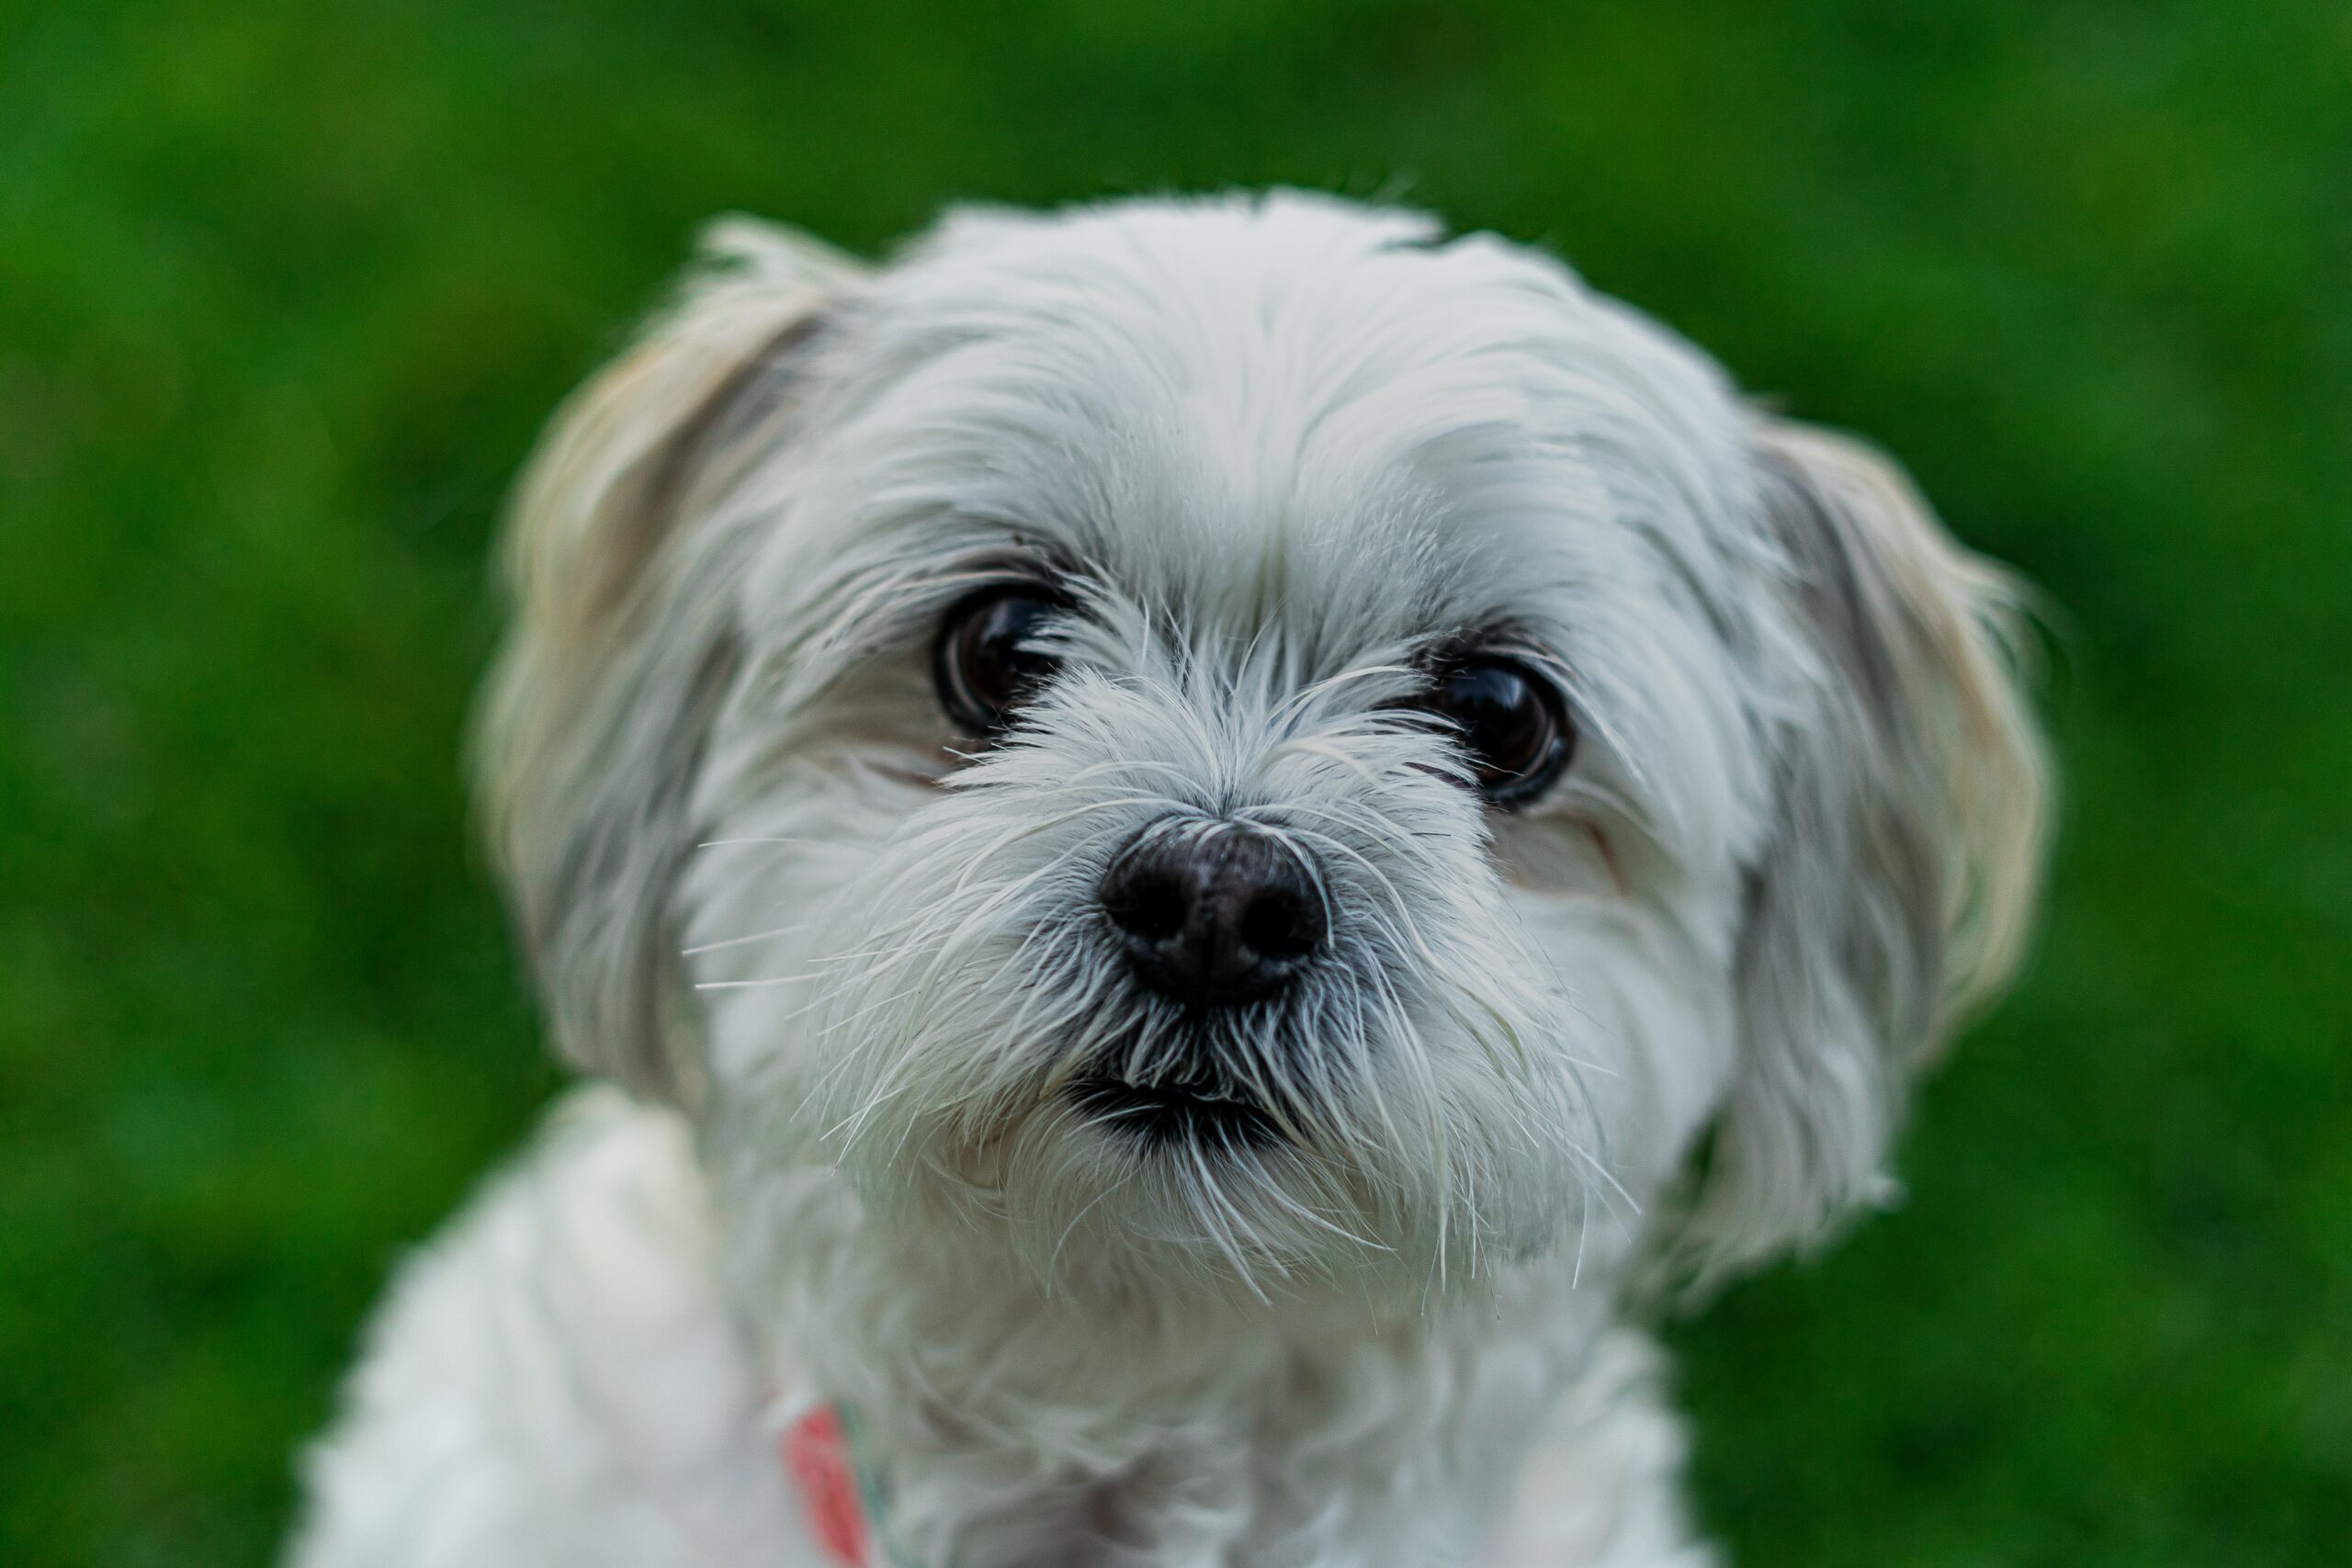 Most Adorable Small Dog Breeds - www.inf-inet.com